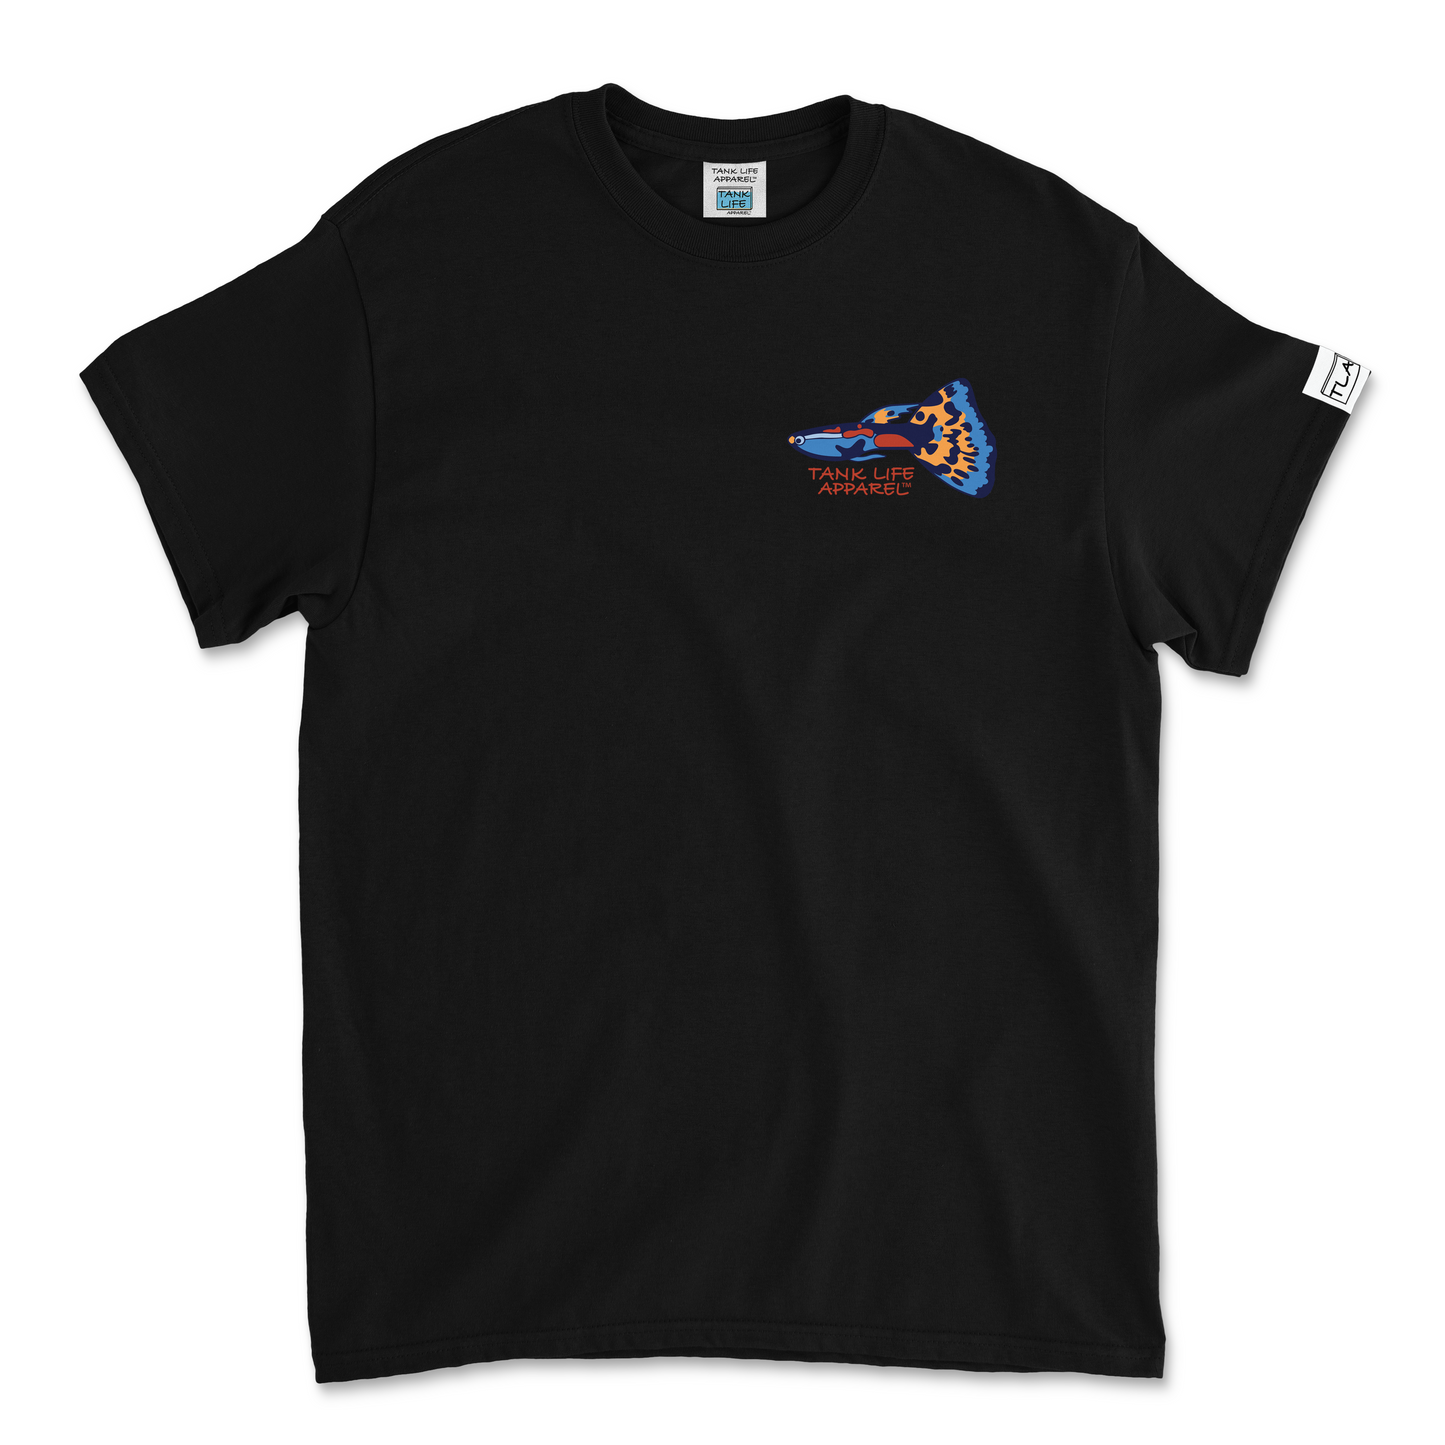 The Tank Life Apparel guppy fish design on a classic tee with our custom TLA sleeve label. Colorful little fish. 